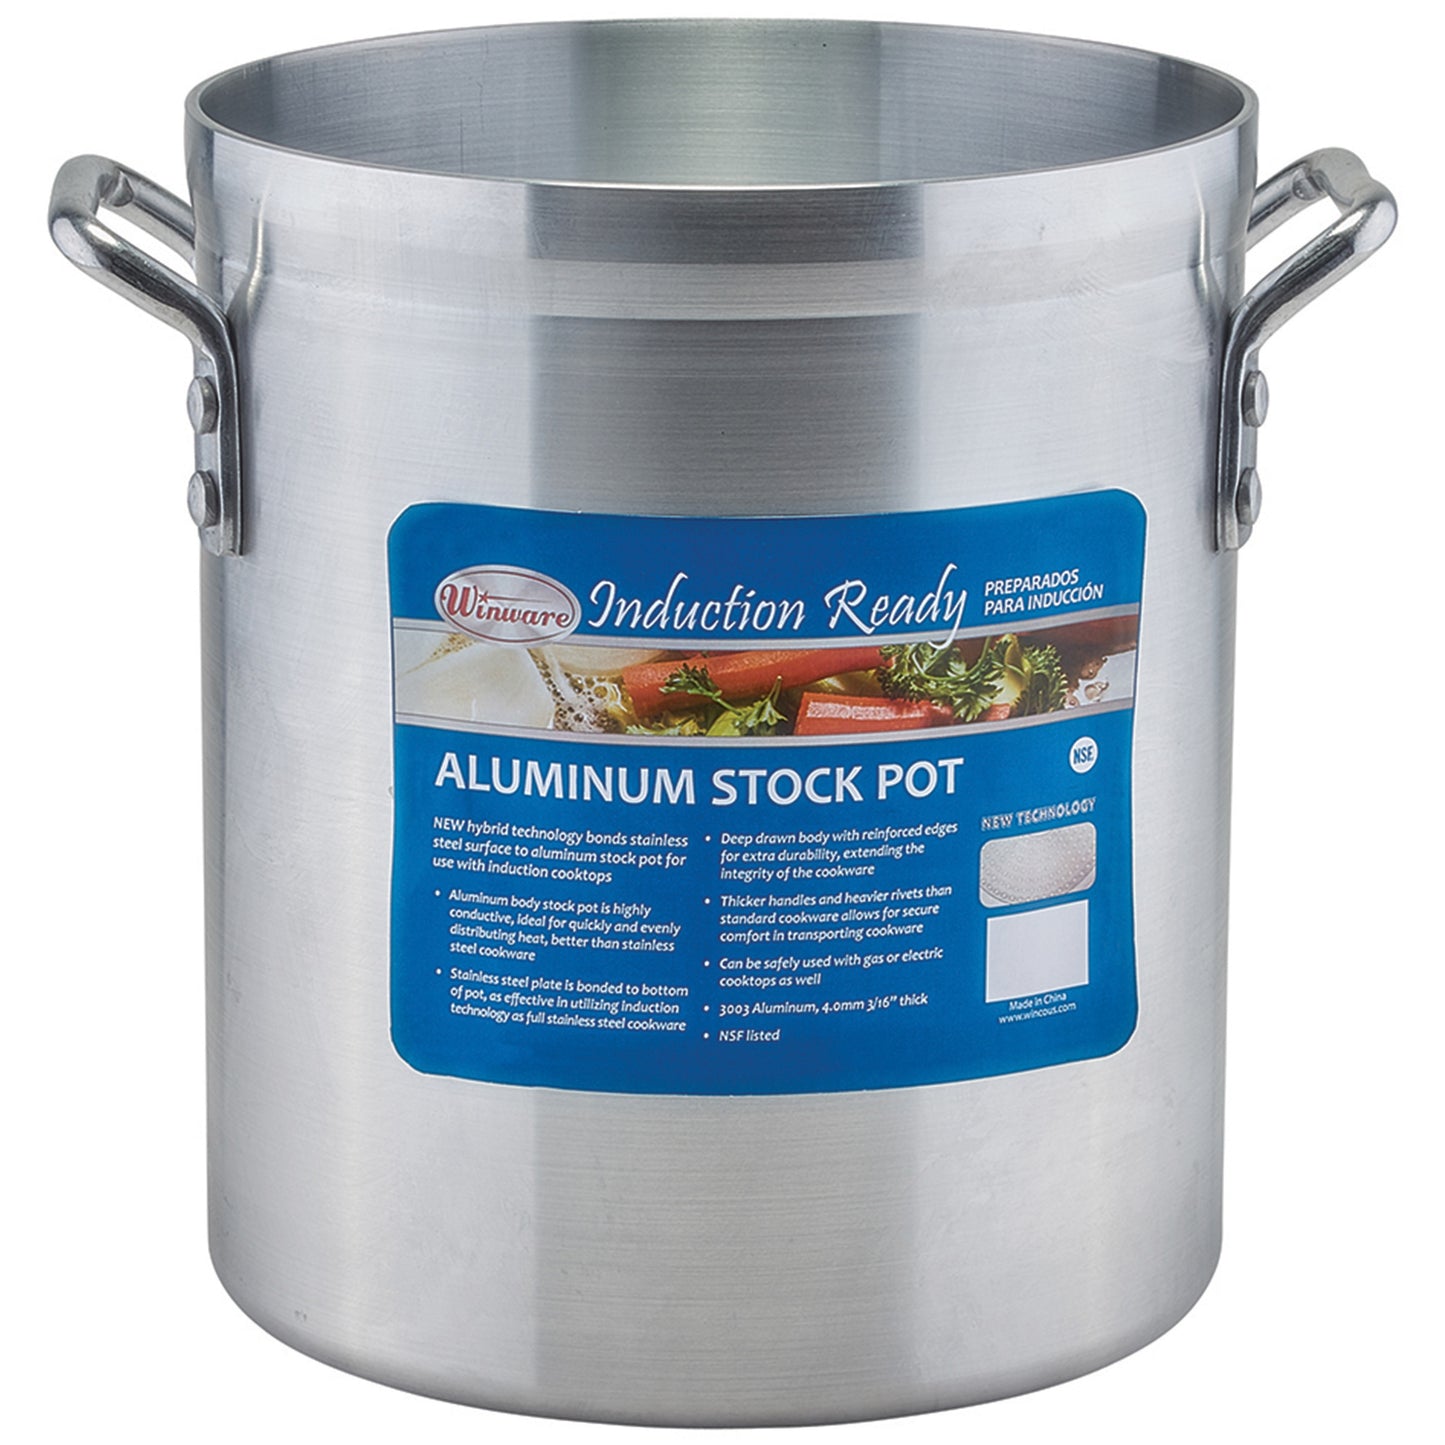 AXSI-12 - Induction Ready Aluminum Stock Pots with Stainless Steel Bottom - 12 Quart